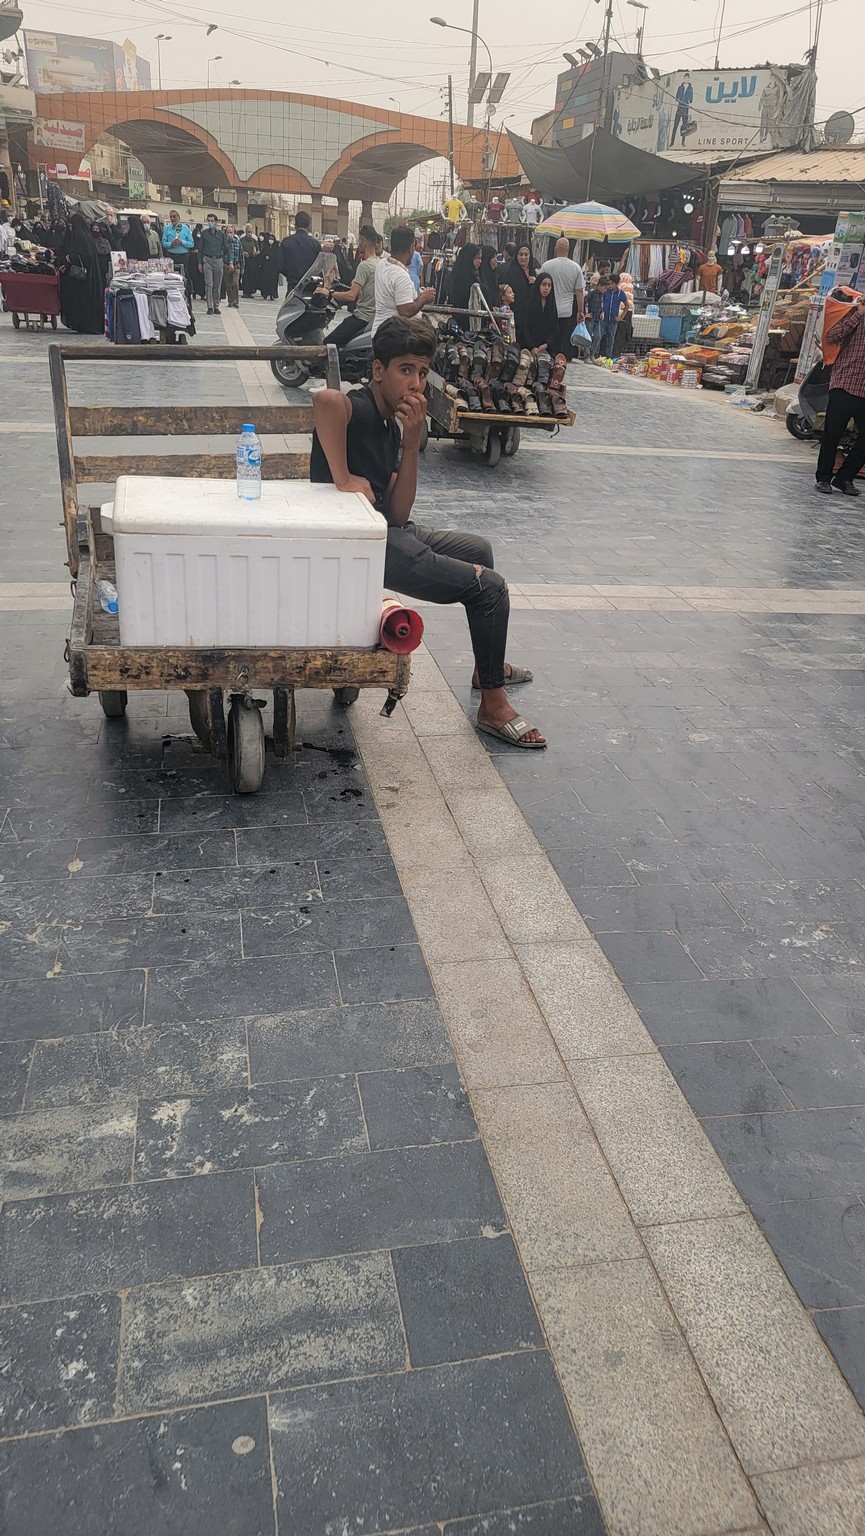 a man sitting on a cart with a cooler on it